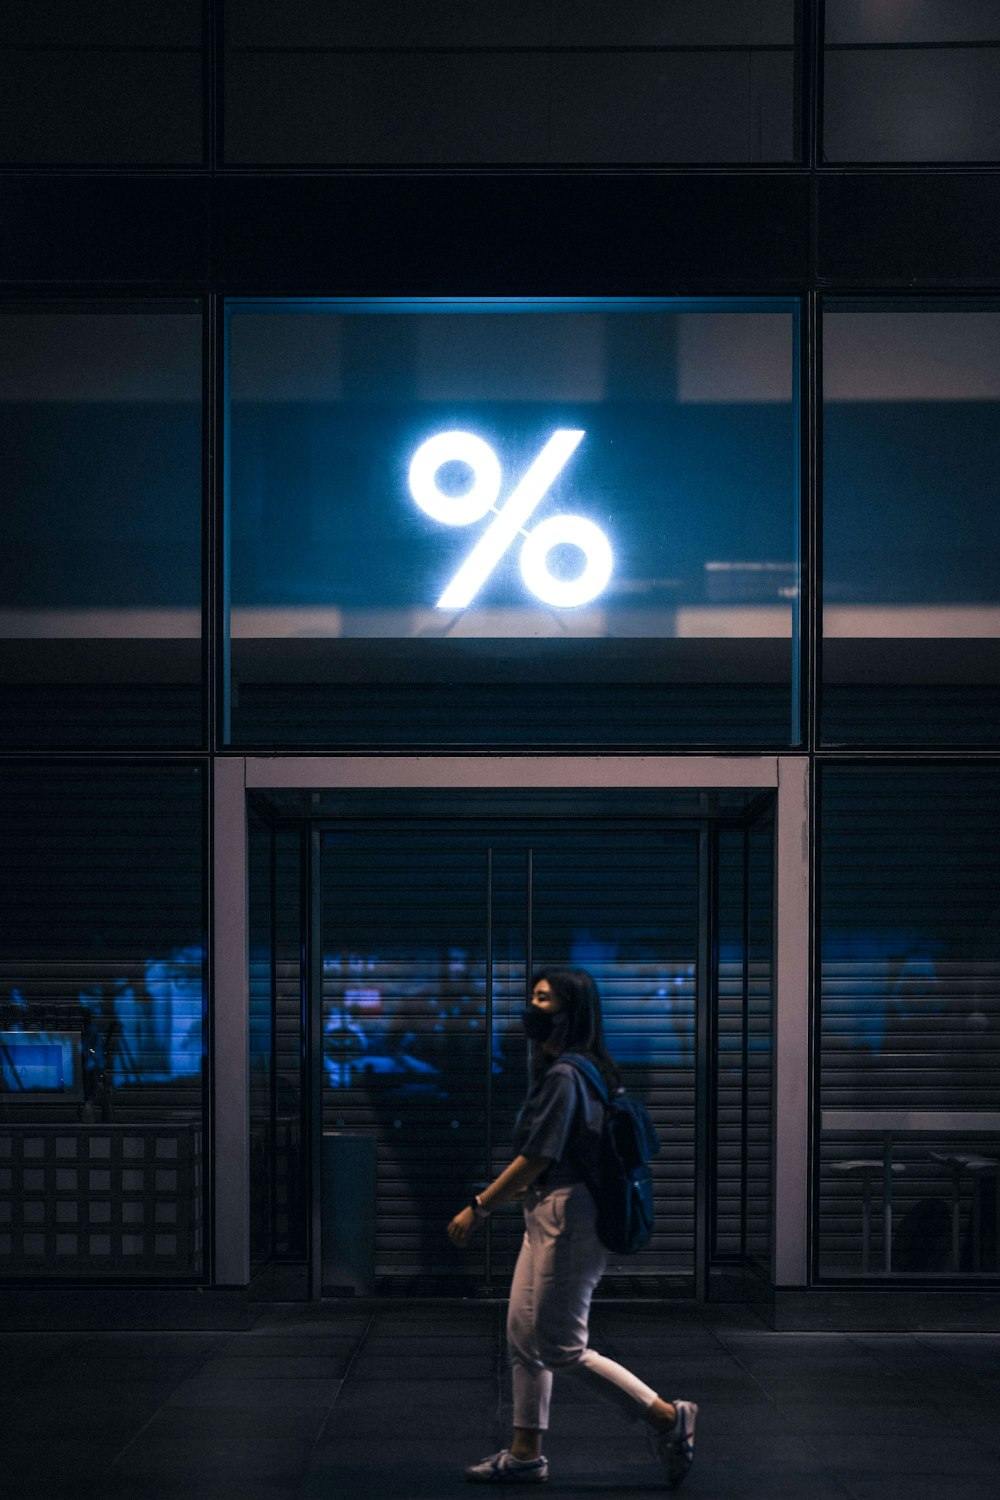 a person walking in front of a building